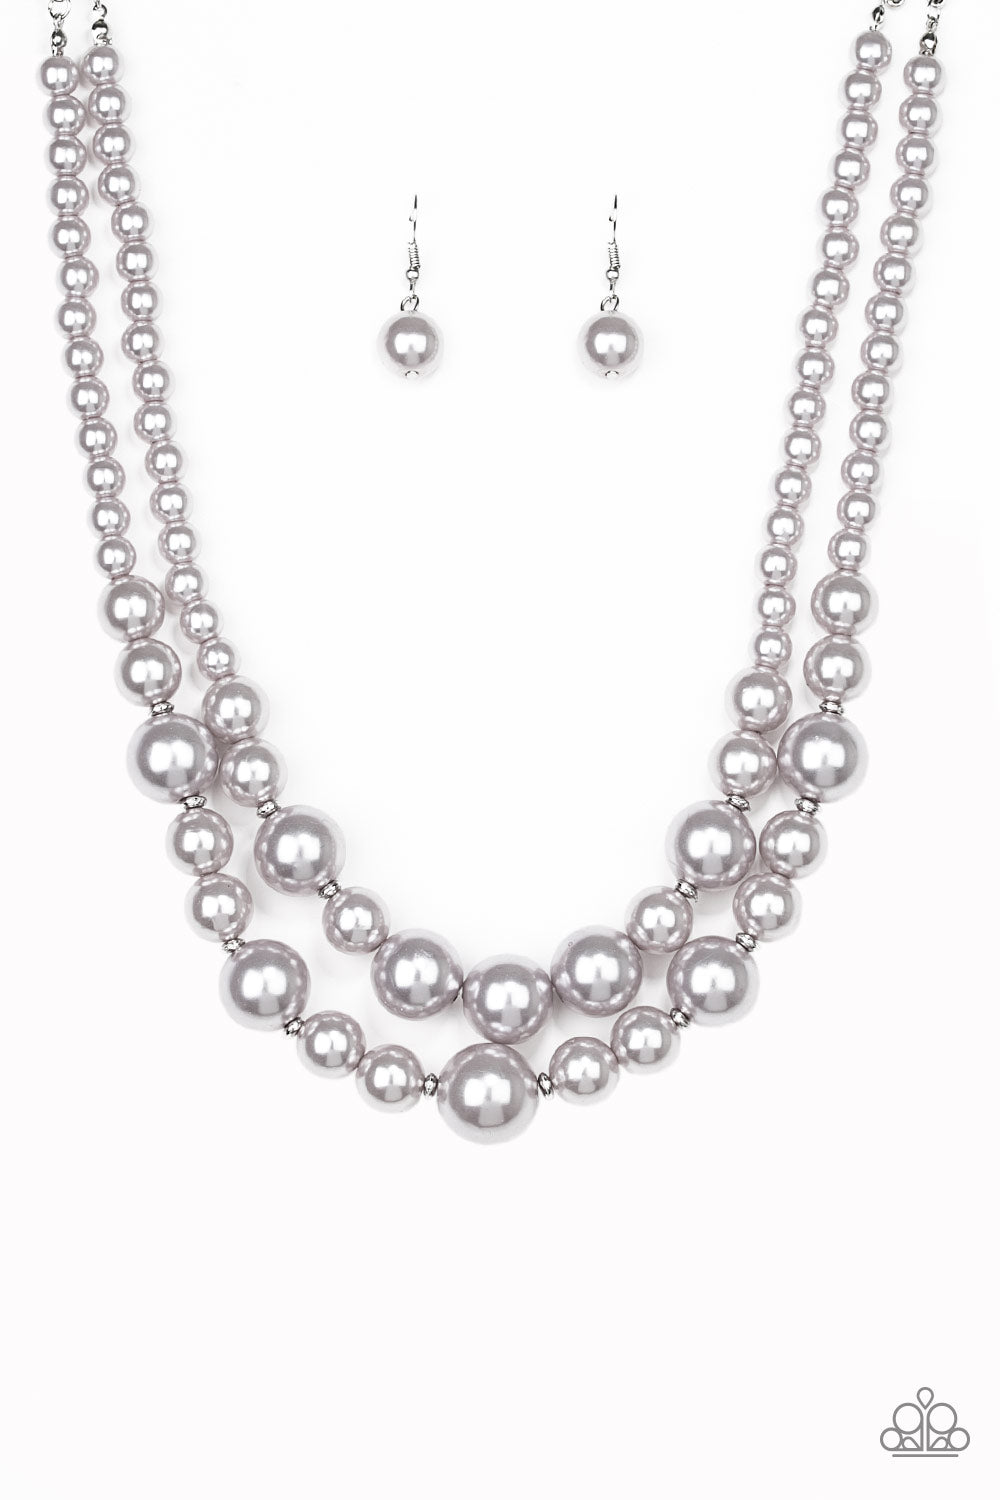 The More The Modest - Silver Necklace - TheMasterCollection